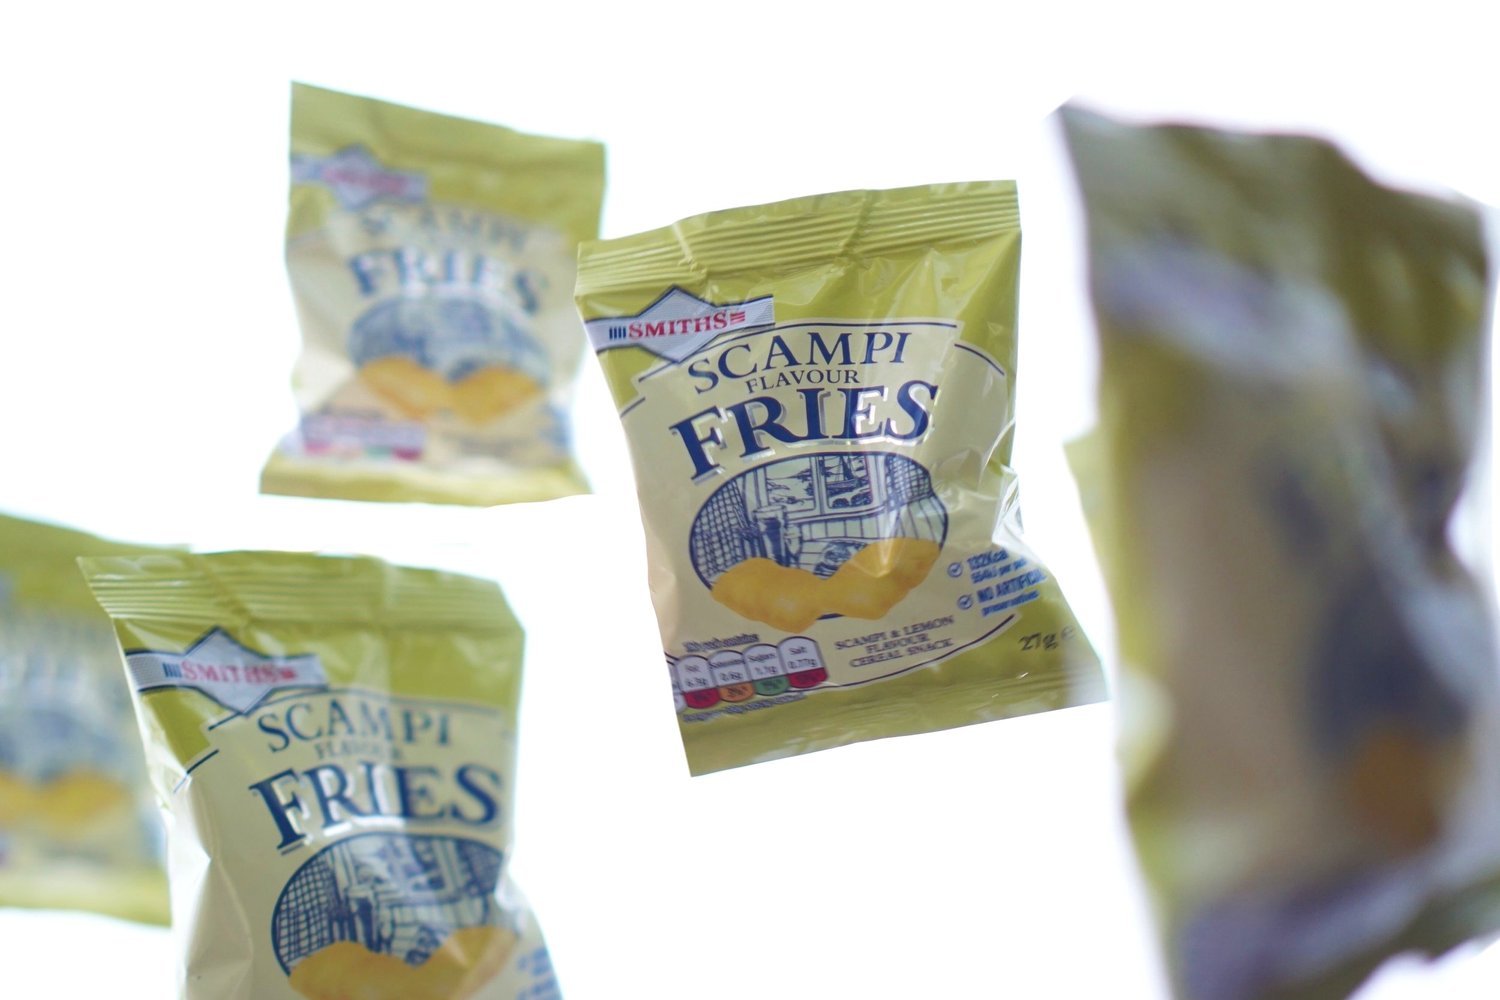 Cut To The Feeling — The Anatomy of Smith’s Scampi Fries